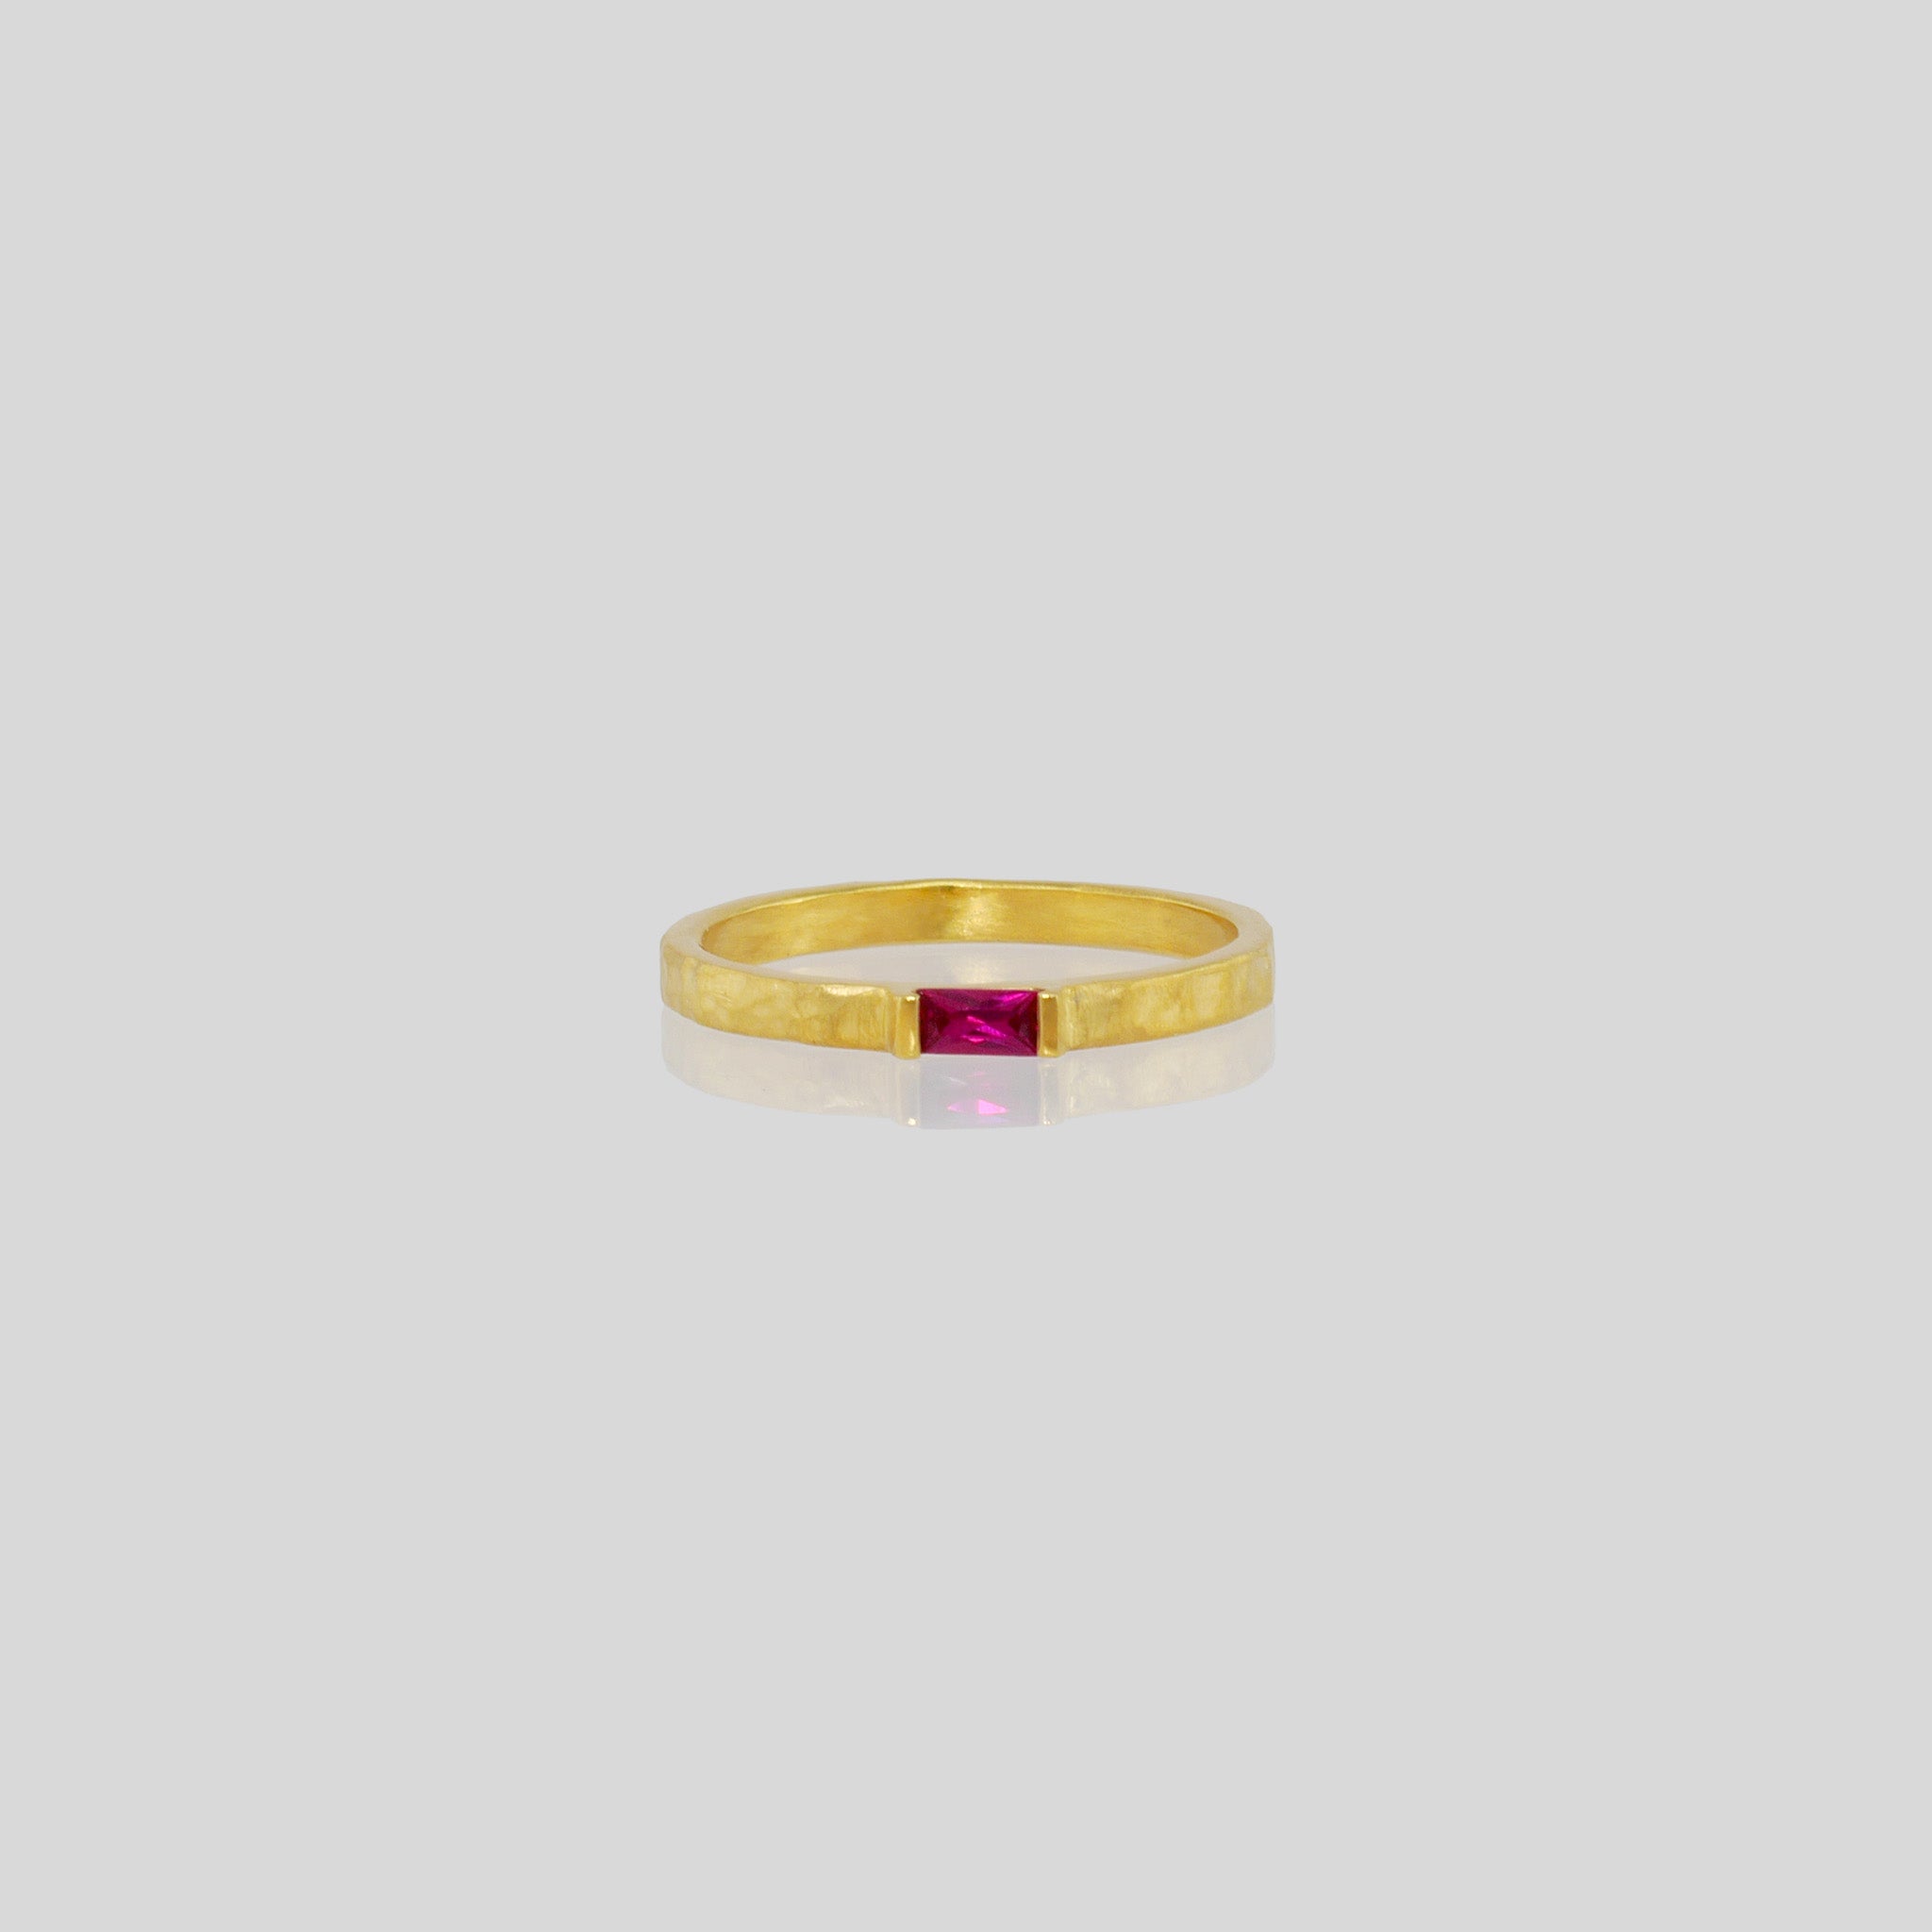 Handmade gold ring with hand-hammered surface and baguette Ruby accent. Timeless elegance in Yellow gold, a perfect addition to any ensemble.